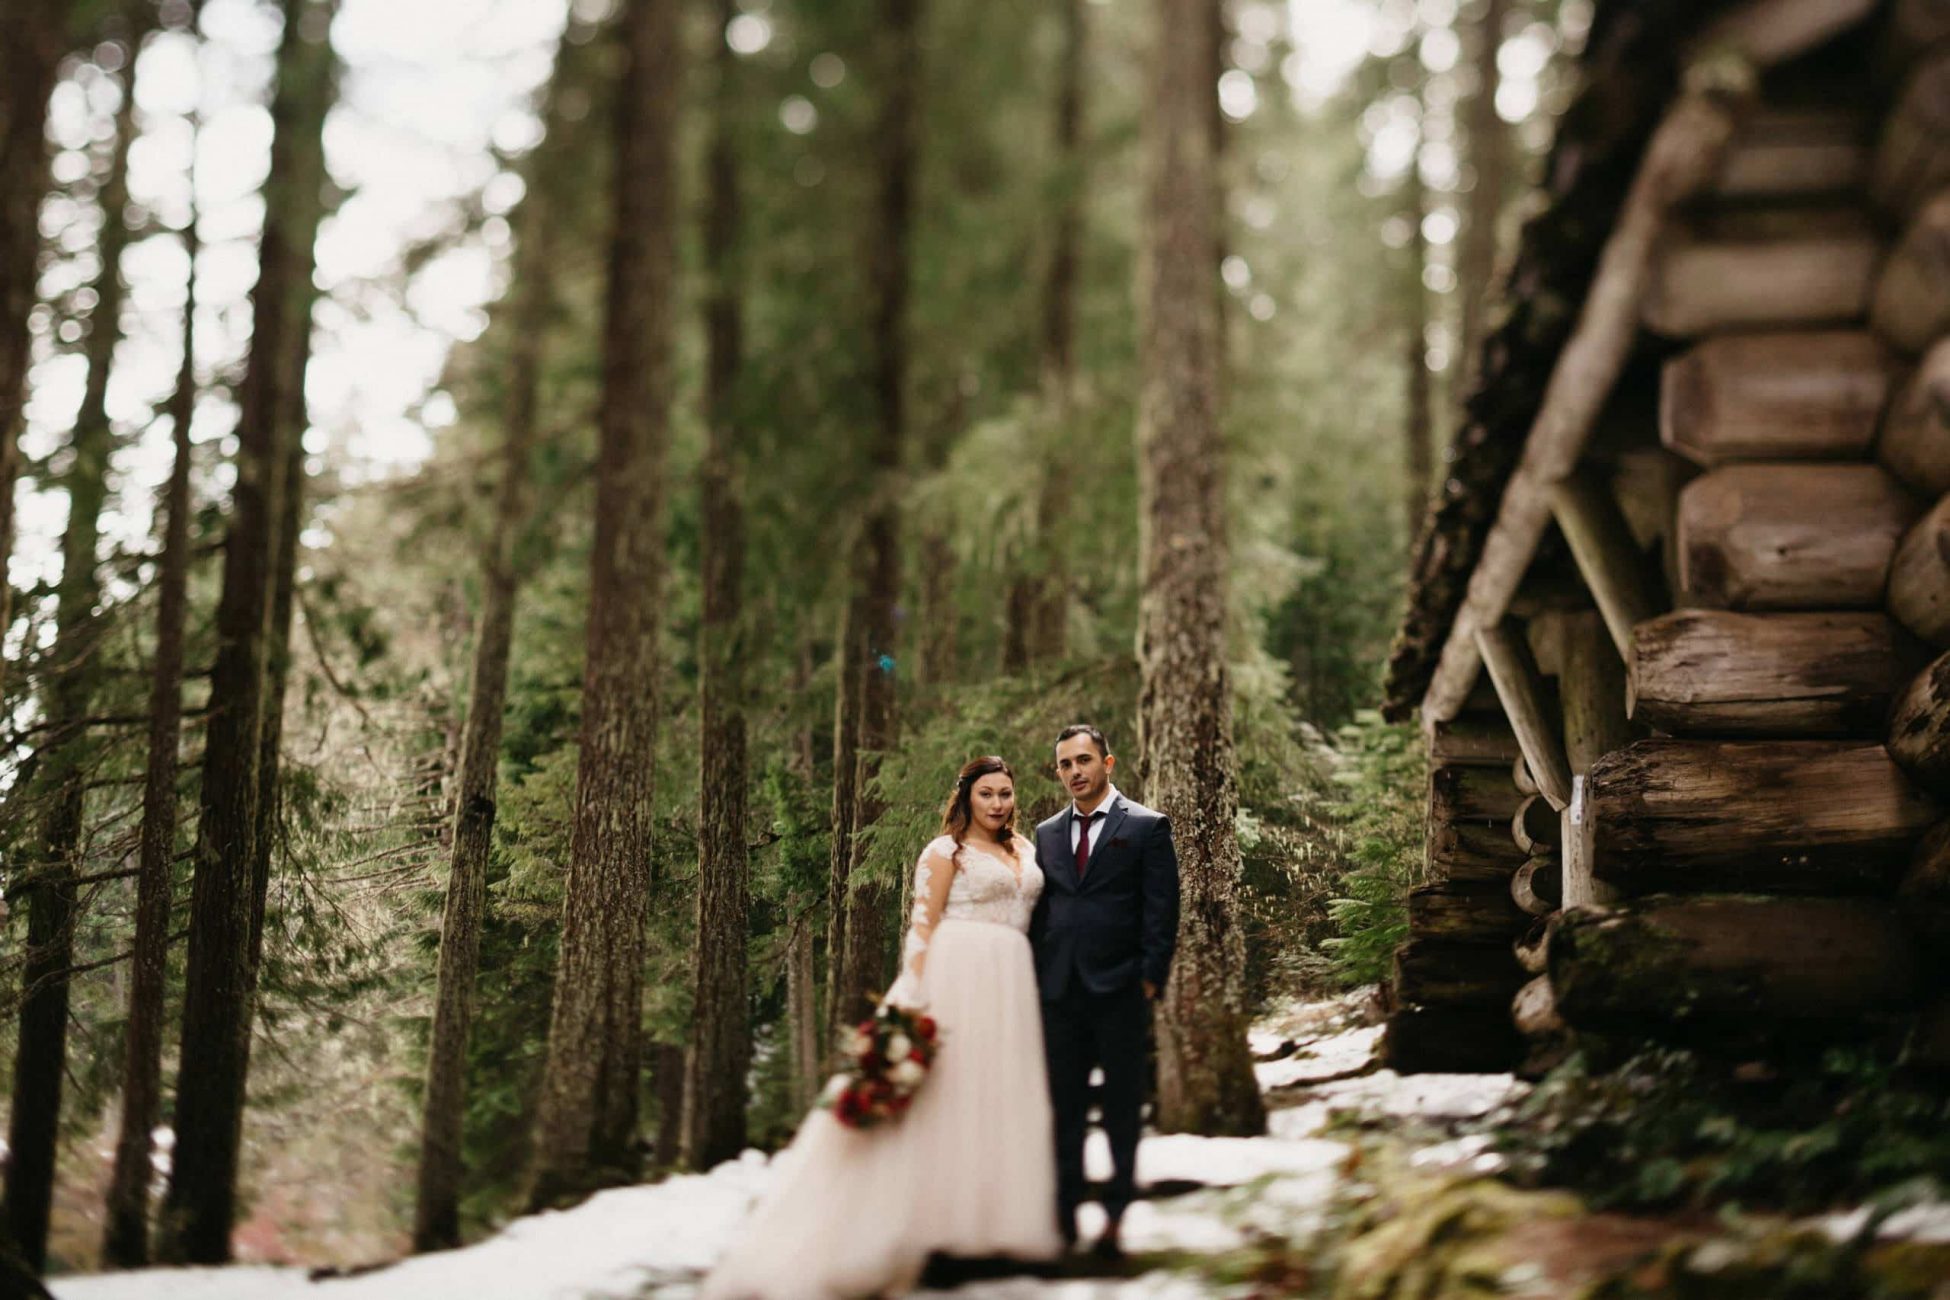 McKenzie River intimate wedding and elopement in the forest near a cabin